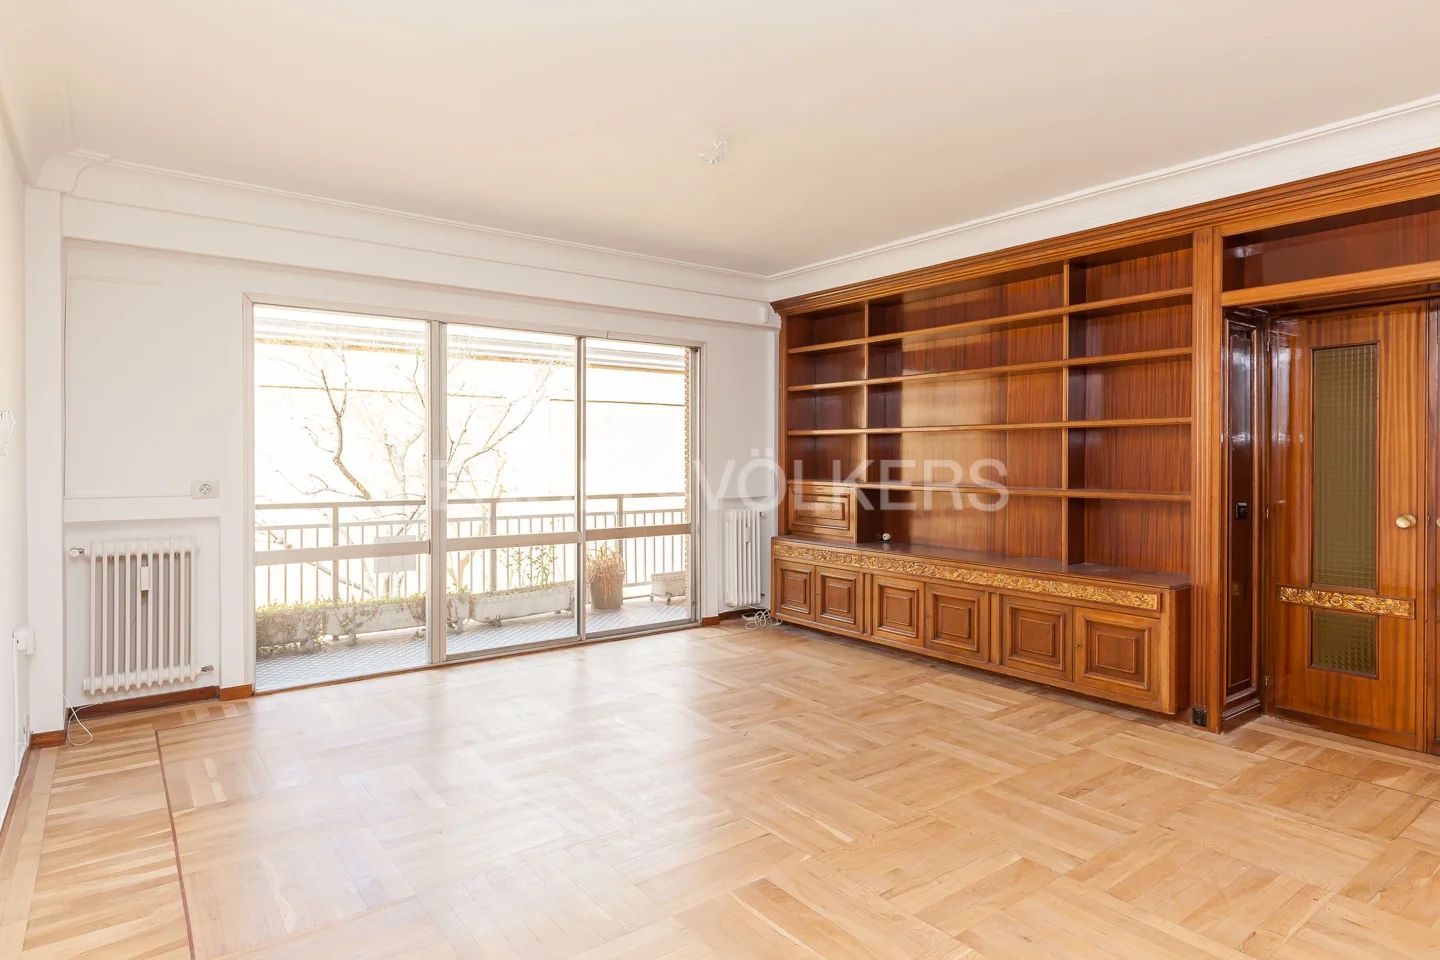 Great flat with garage and terrace in Almagro